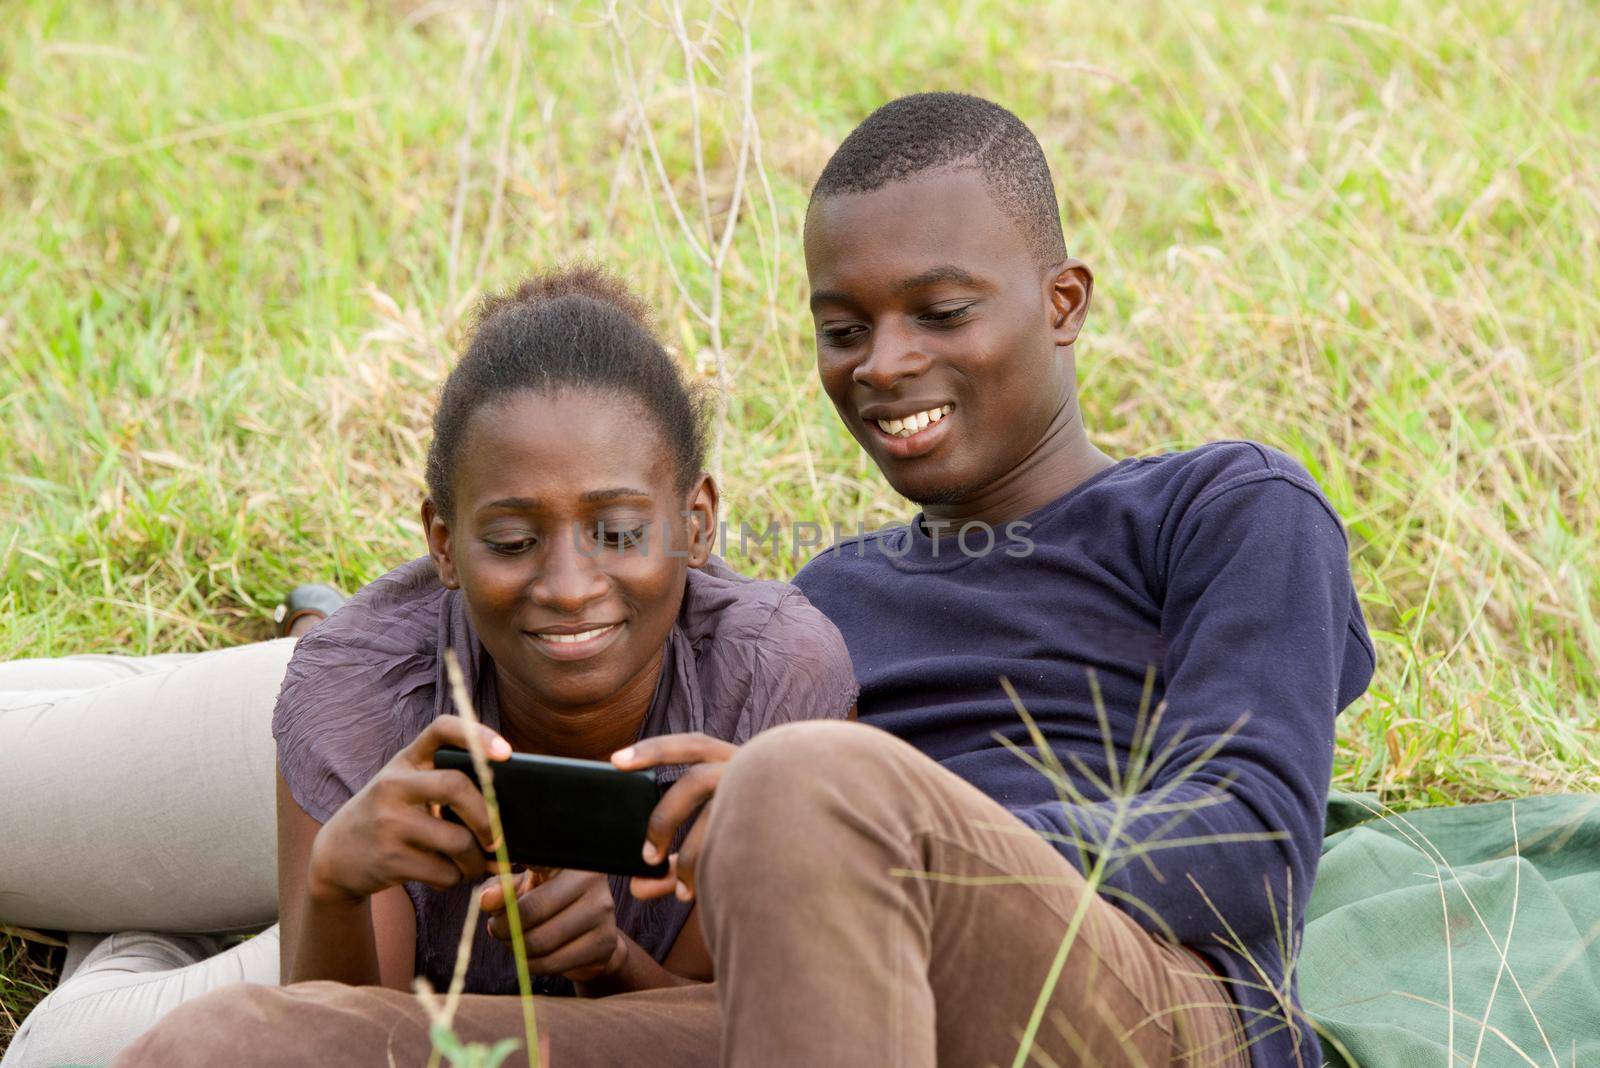 young african couple intertwined in a park looking at mobile phone while smiling.